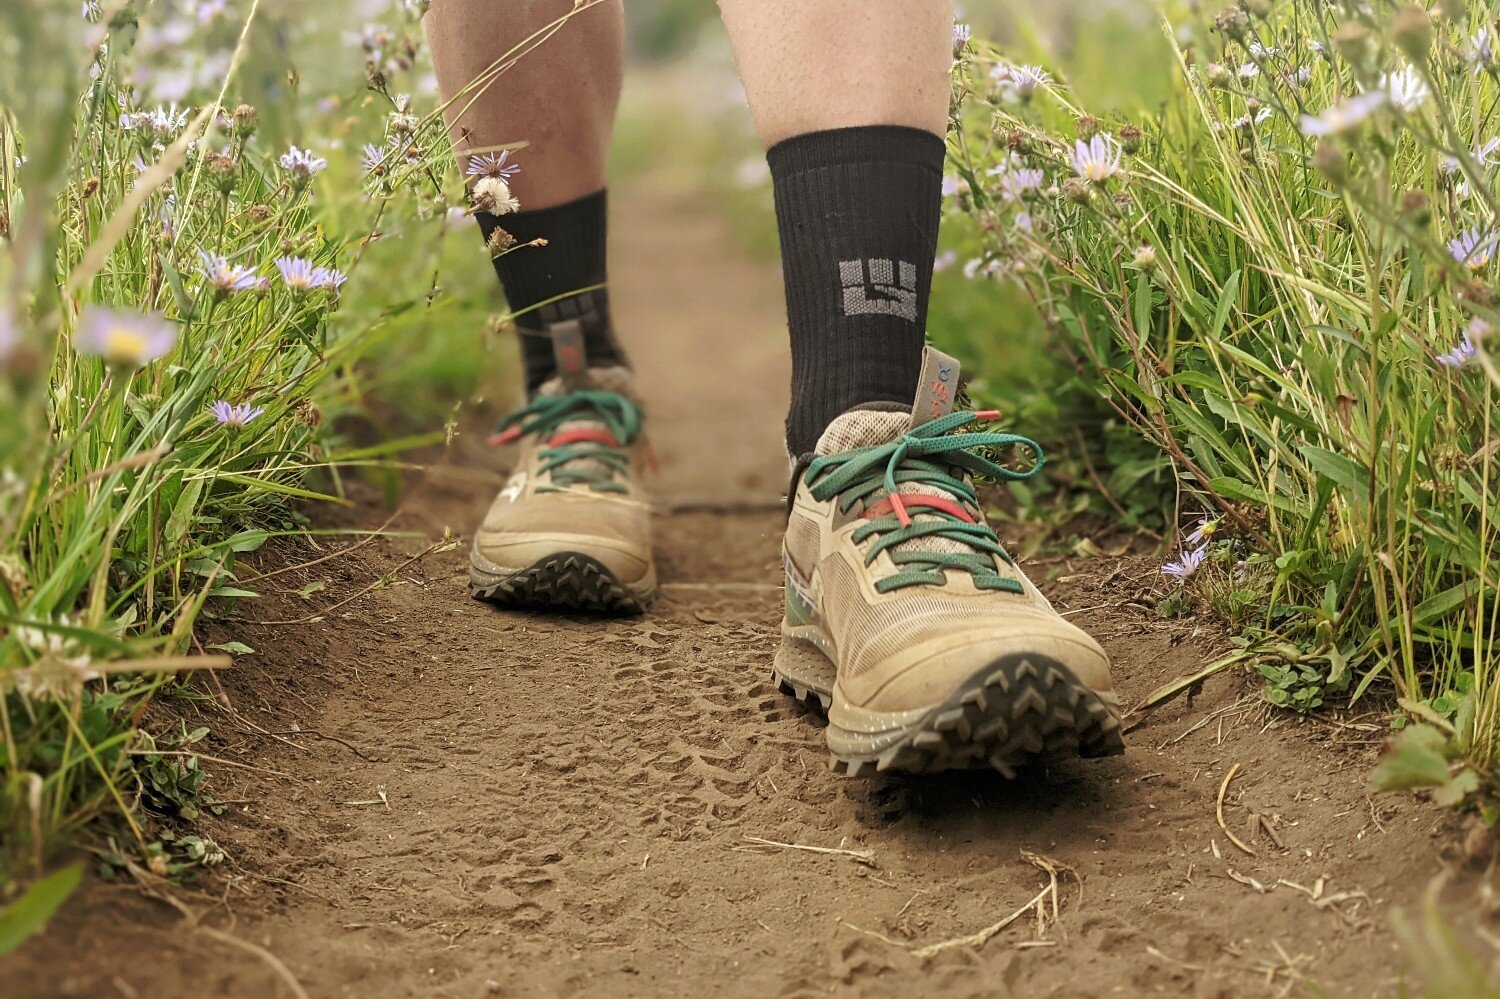 The Saucony Peregrine 11 hiking shoes are lightweight & comfortable so your feet can stay cool & blister-free